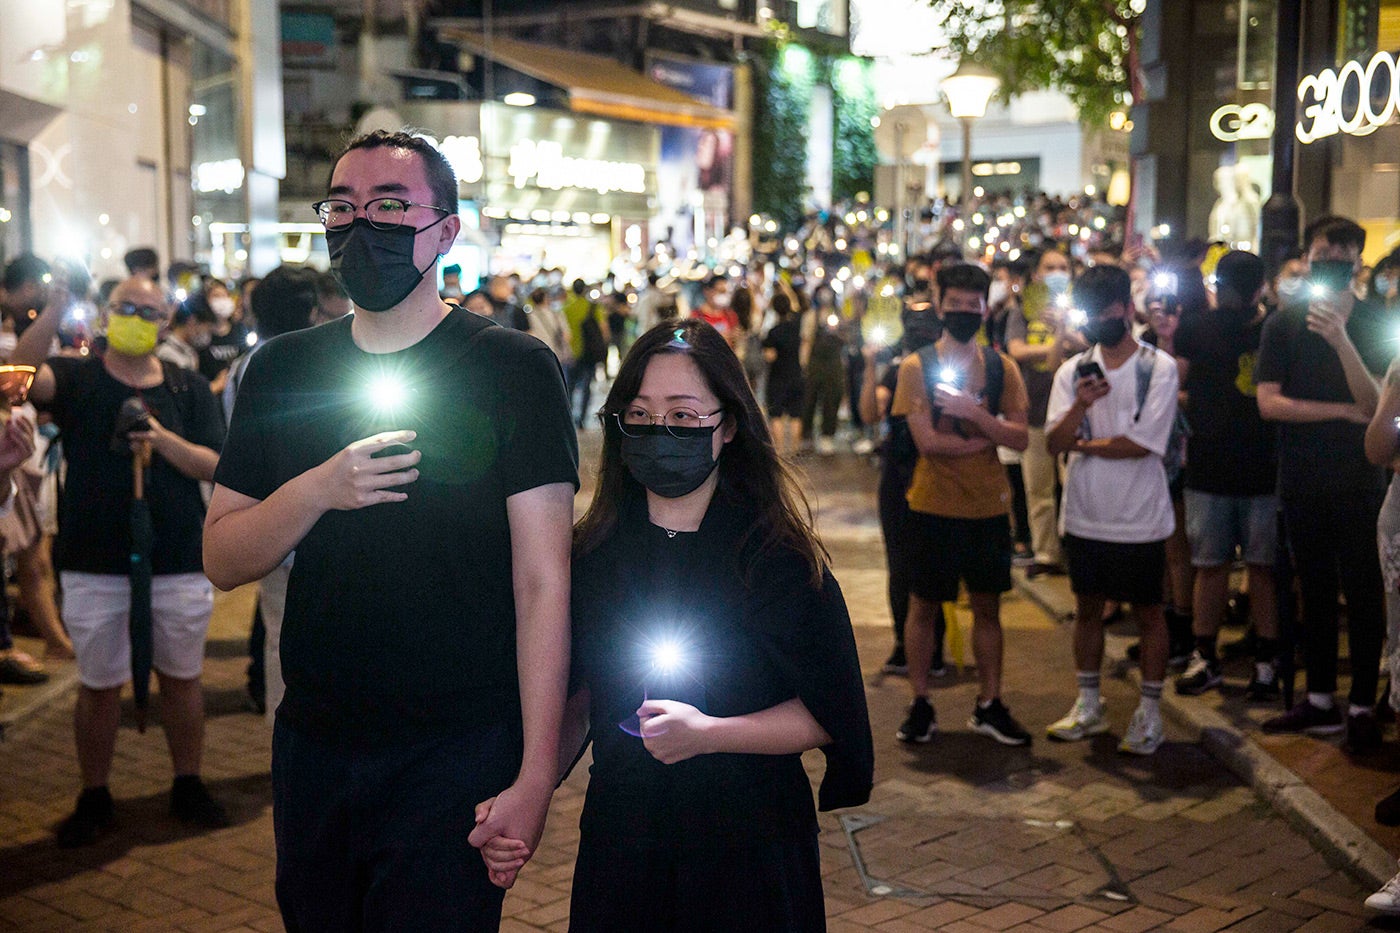 On June 4, 2021, despite police’s threats of arrests and the closure of Victoria Park, hundreds and possibly thousands of Hong Kong people still turned up at in Causeway Bay, holding up cellphones in lieu of candles to commemorate the Tiananmen Massacre of 1989.